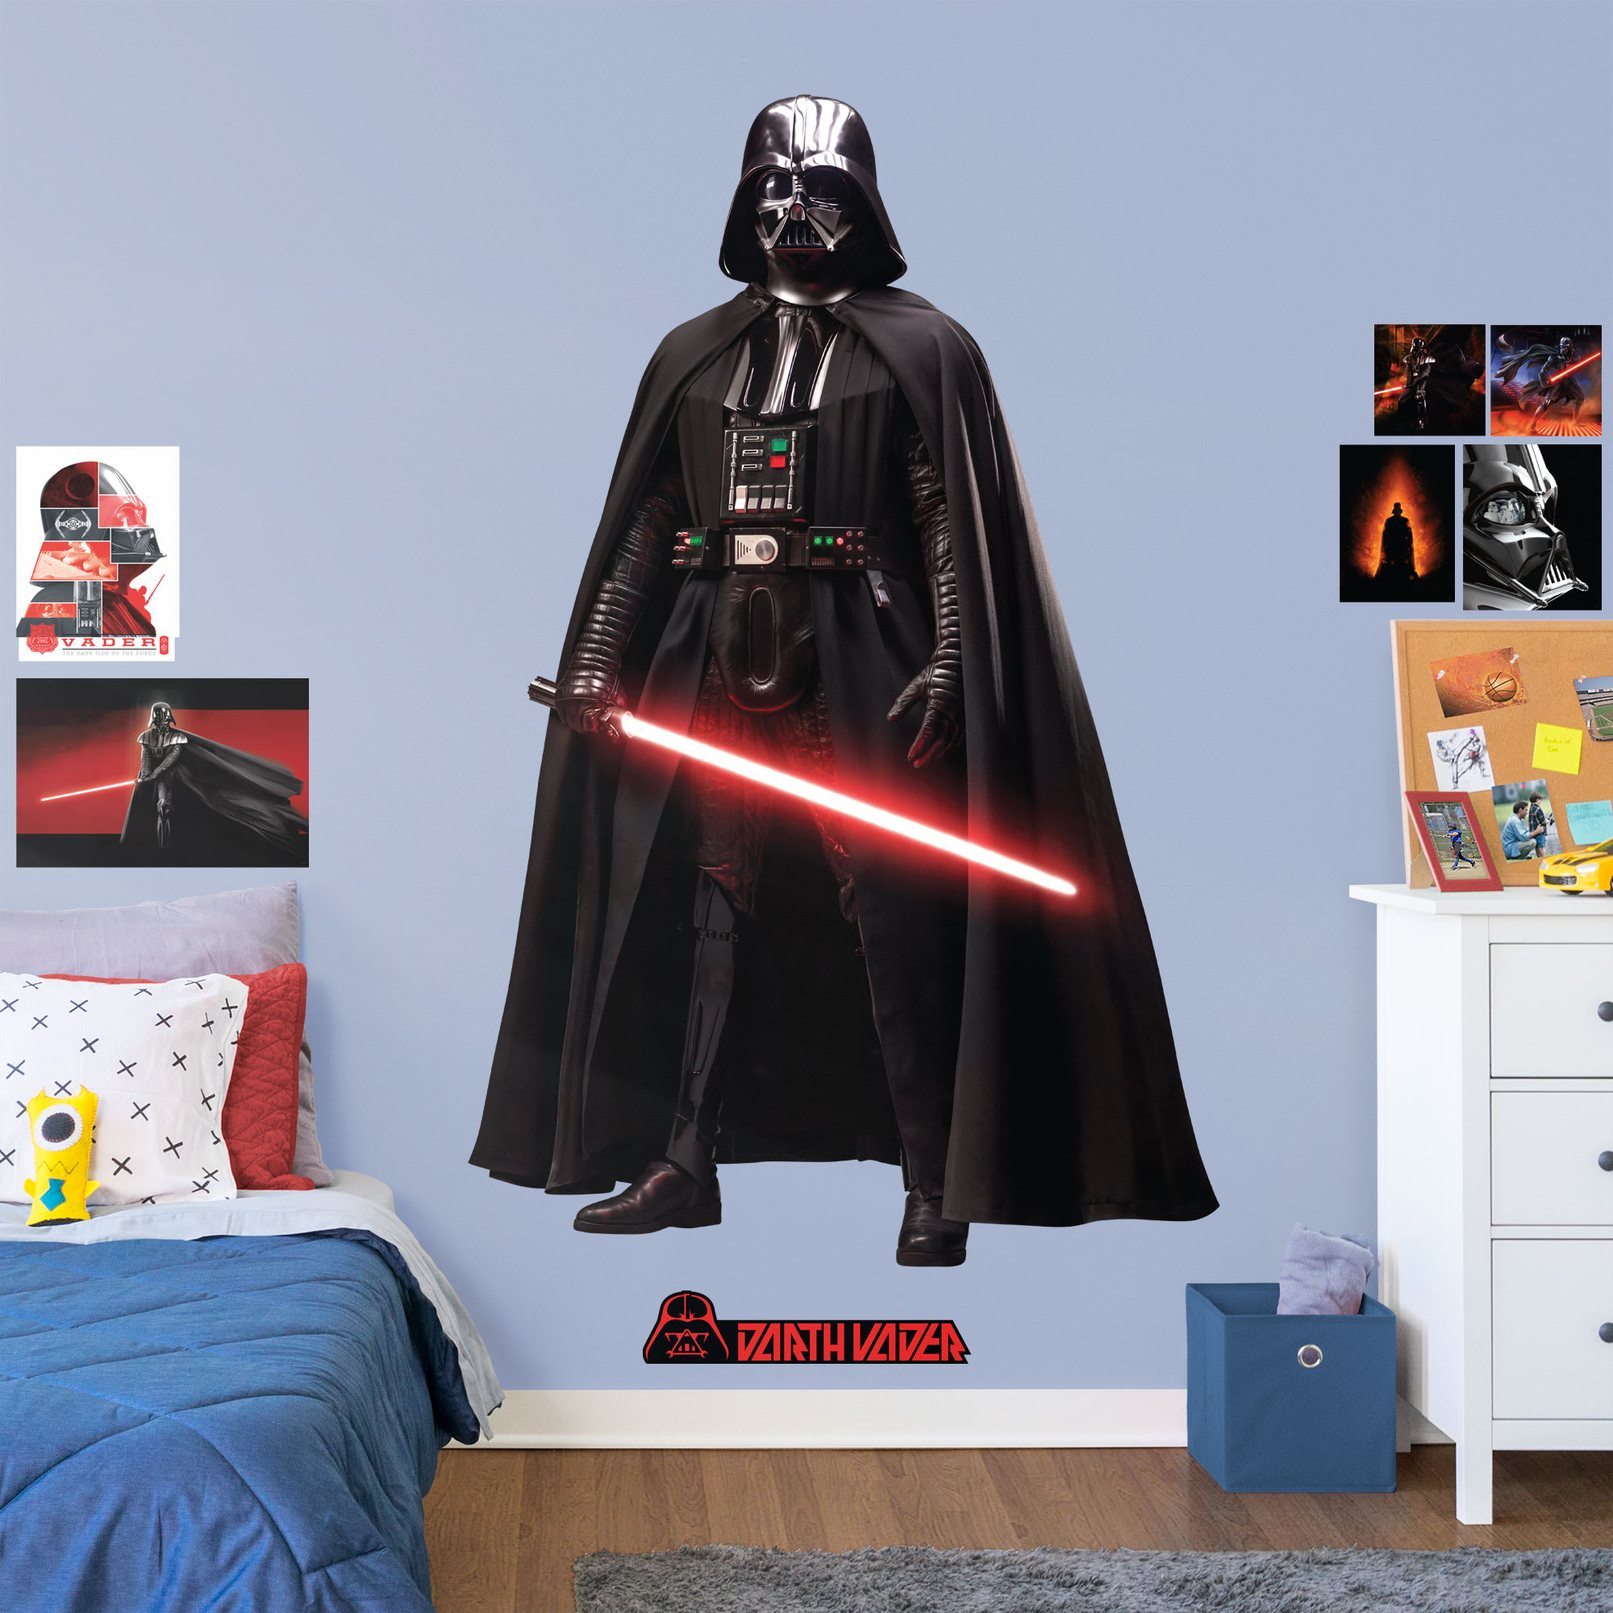 https://fathead.com/collections/star-wars/products/m1900-01070-001?variant=33065830678616